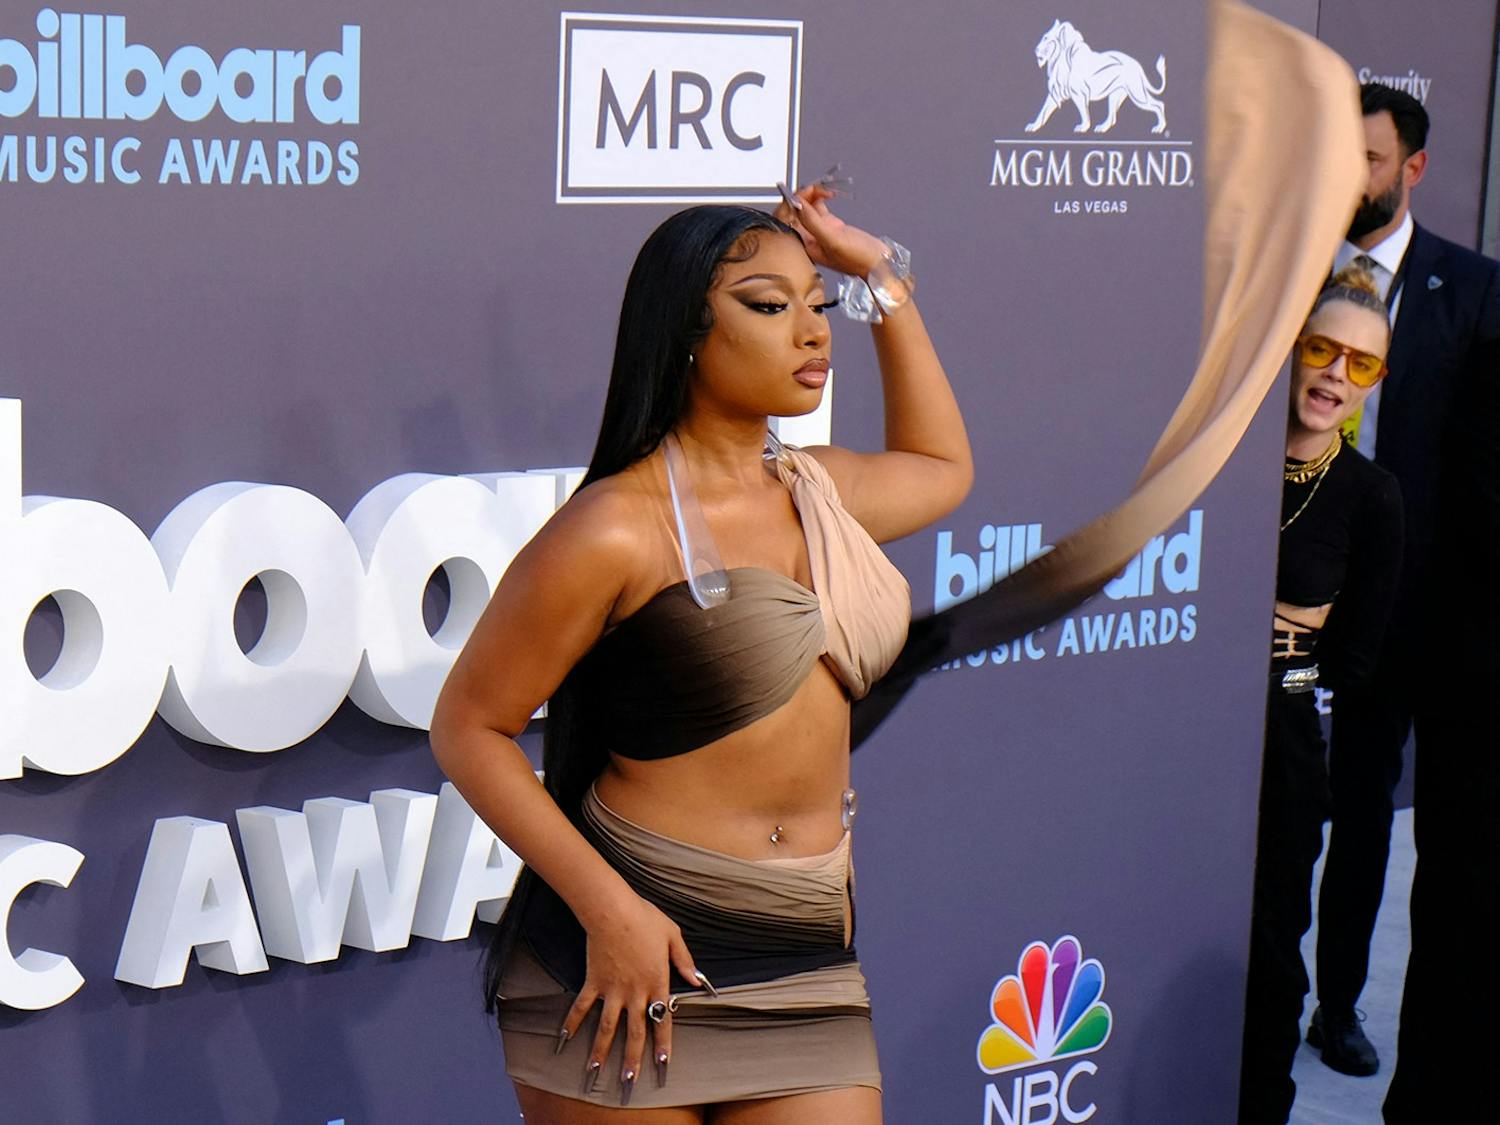 Megan Thee Stallion attends the 2022 Billboard Music Awards at the MGM Grand Garden Arena in Las Vegas on May 15, 2022. (Maria Alejandra Cardona/AFP via Getty Images/TNS)